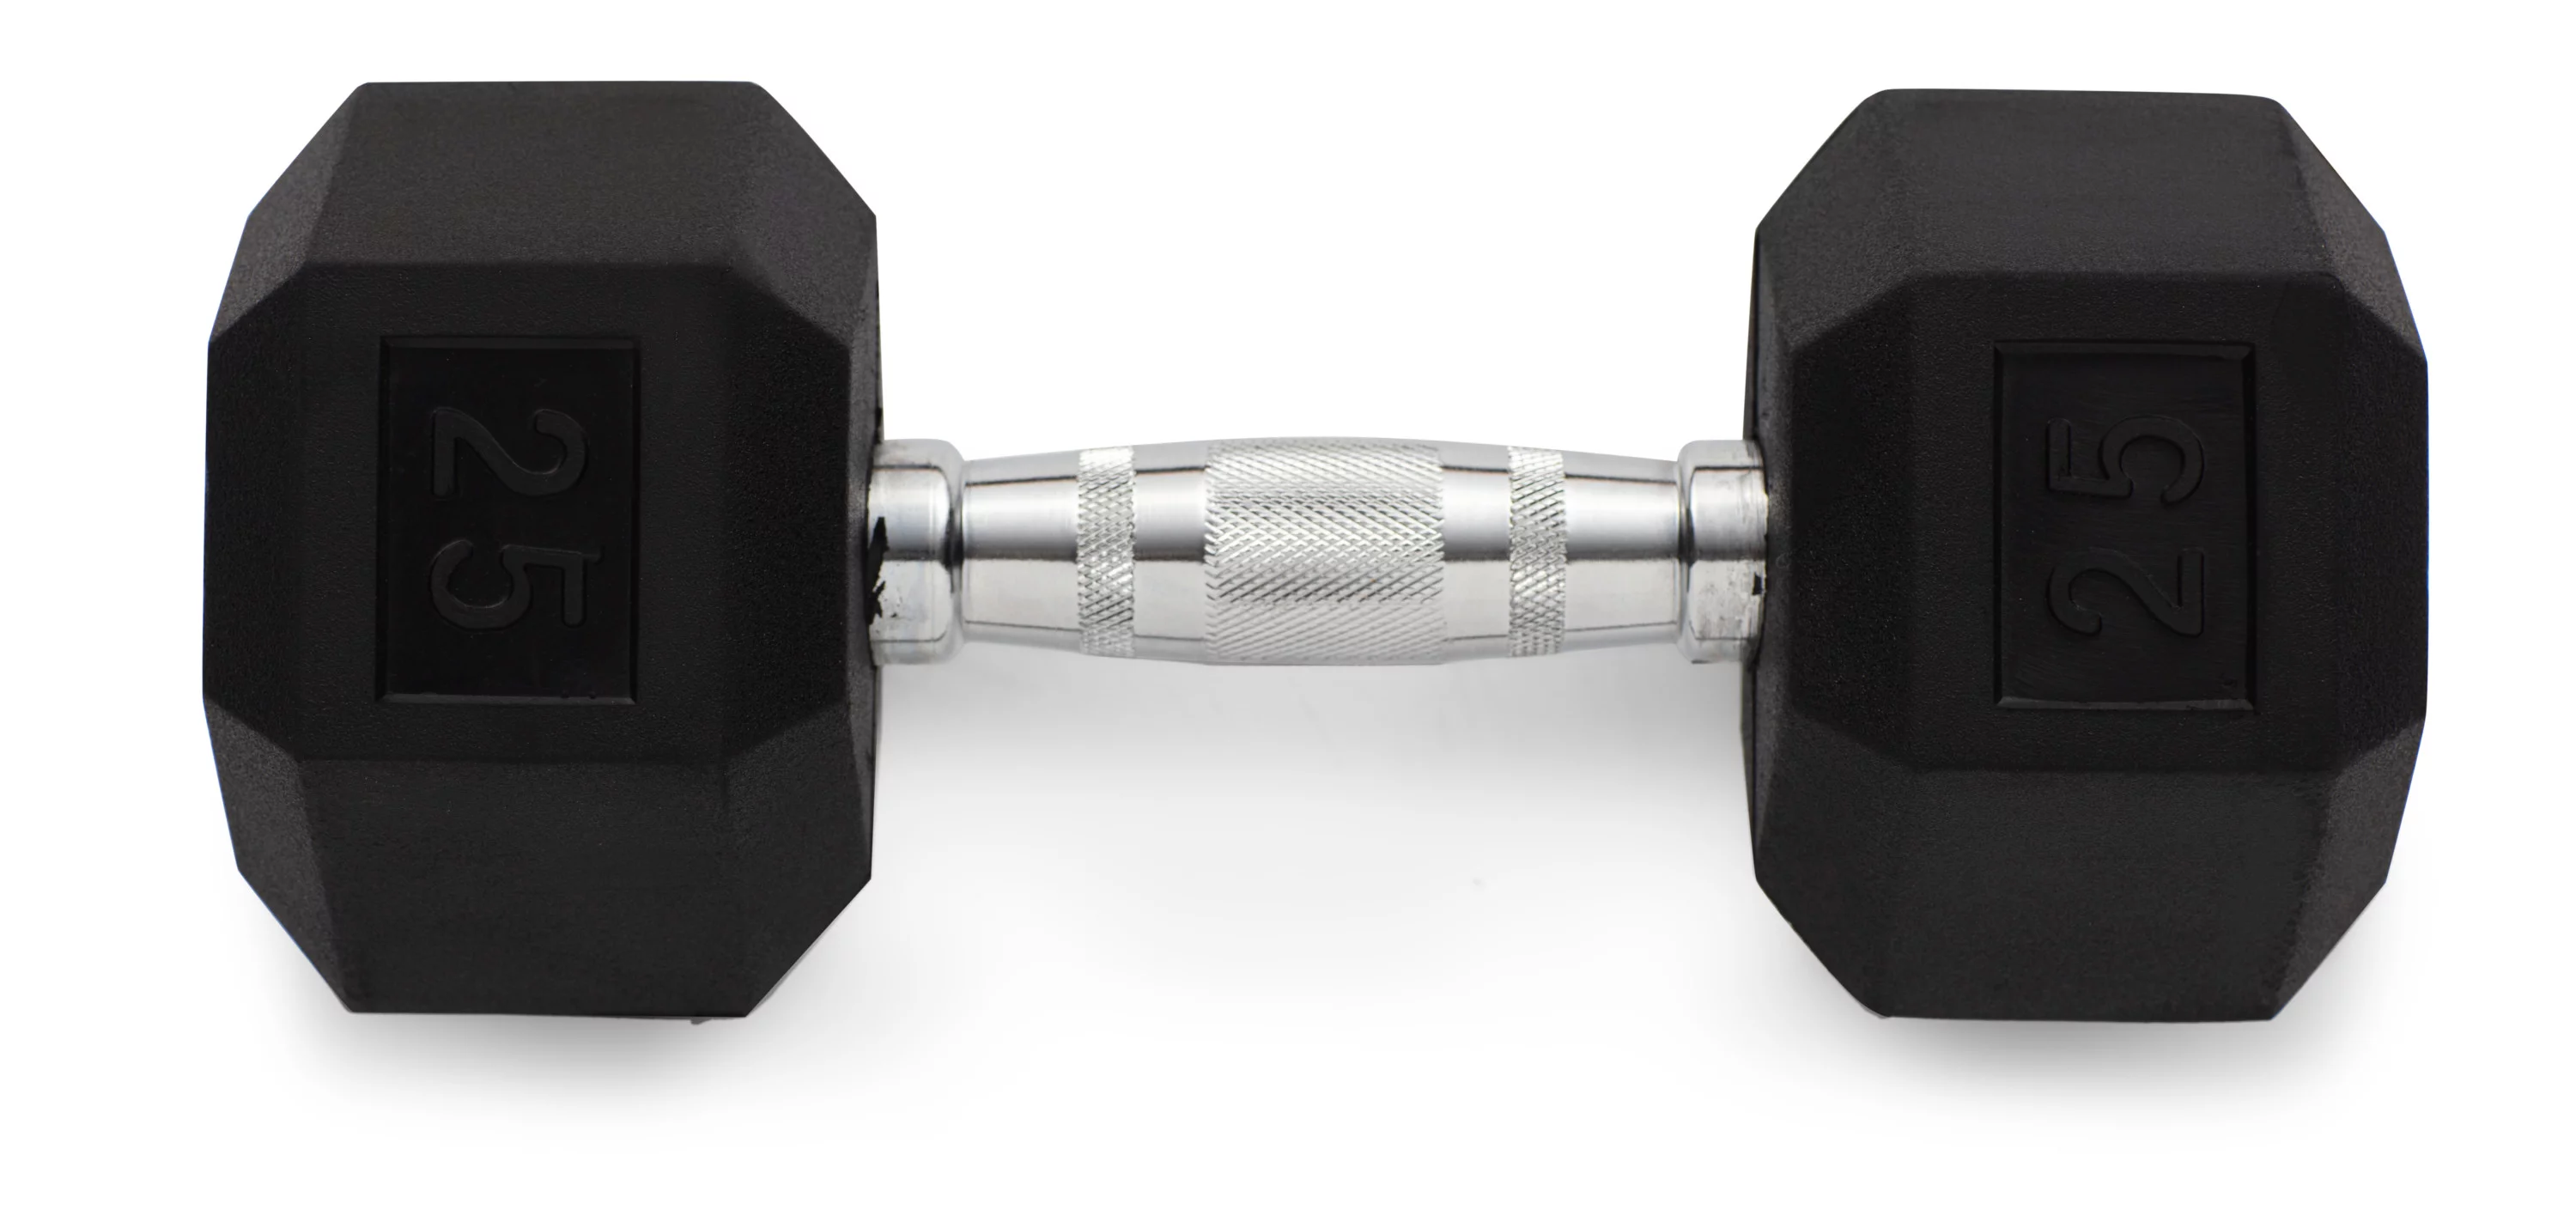 Weider Rubber Hex Dumbbell with Chrome Handle and Knurled Grip, 5-115 lbs